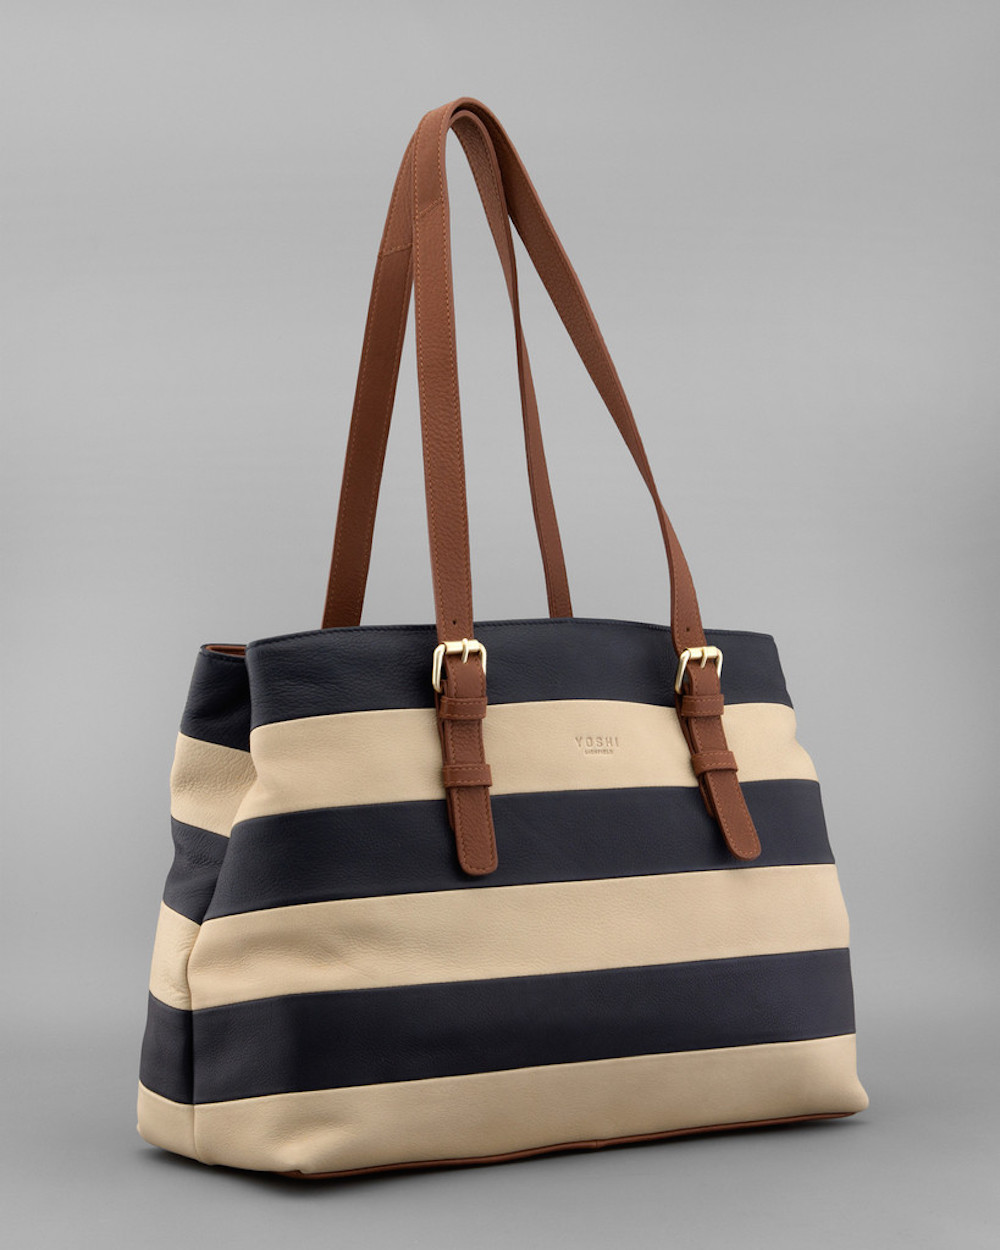 Yoshi Marty Stripe Navy and Cream Leather Shoulder Bag